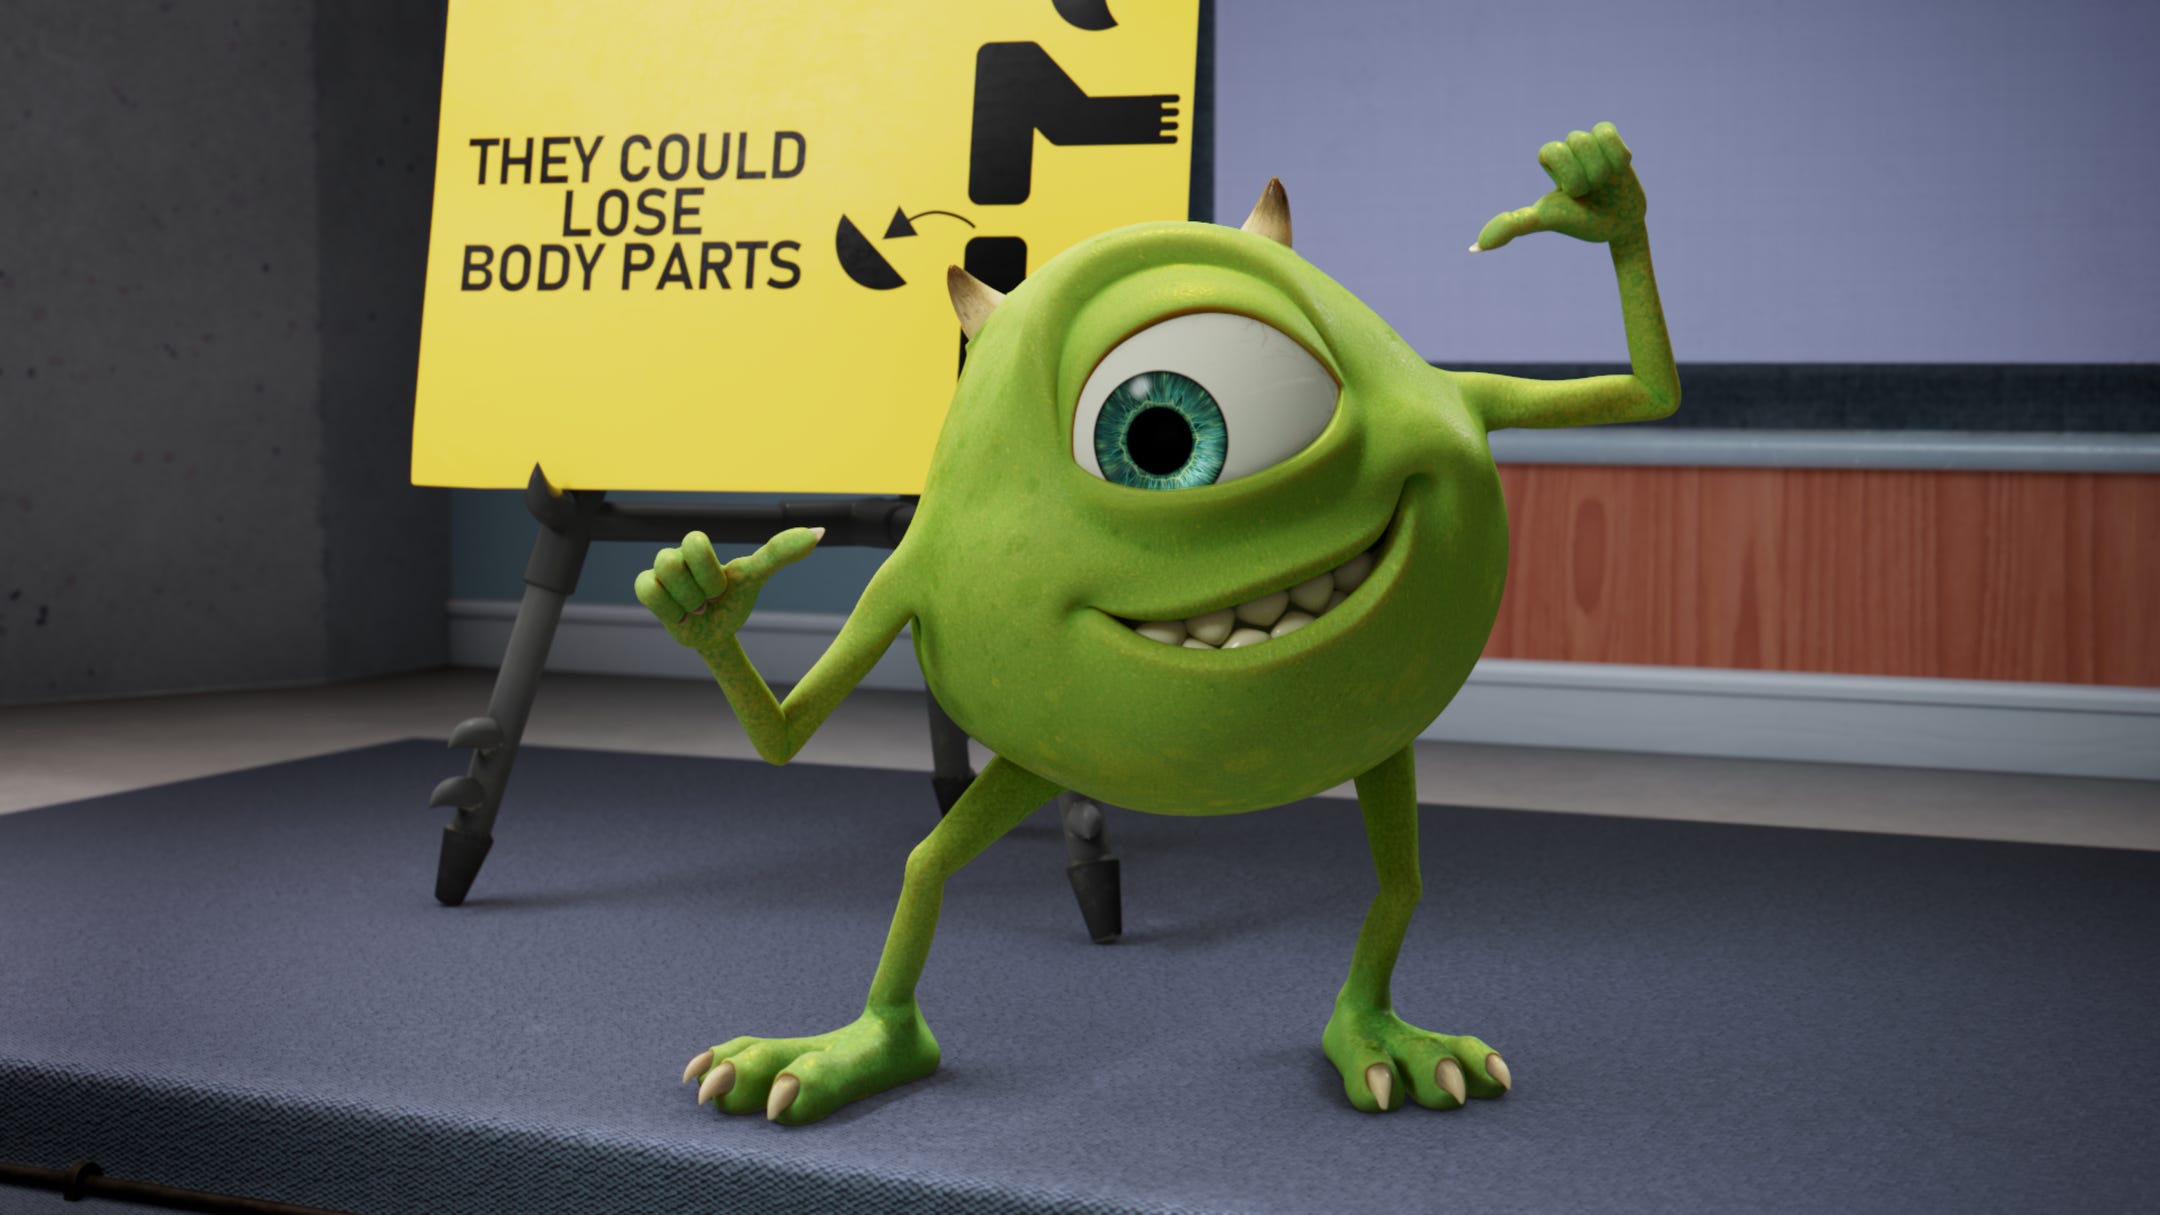 Mike and Sully are Back in Monsters at Work  Mike and sully, Every disney  movie, Sully monsters inc